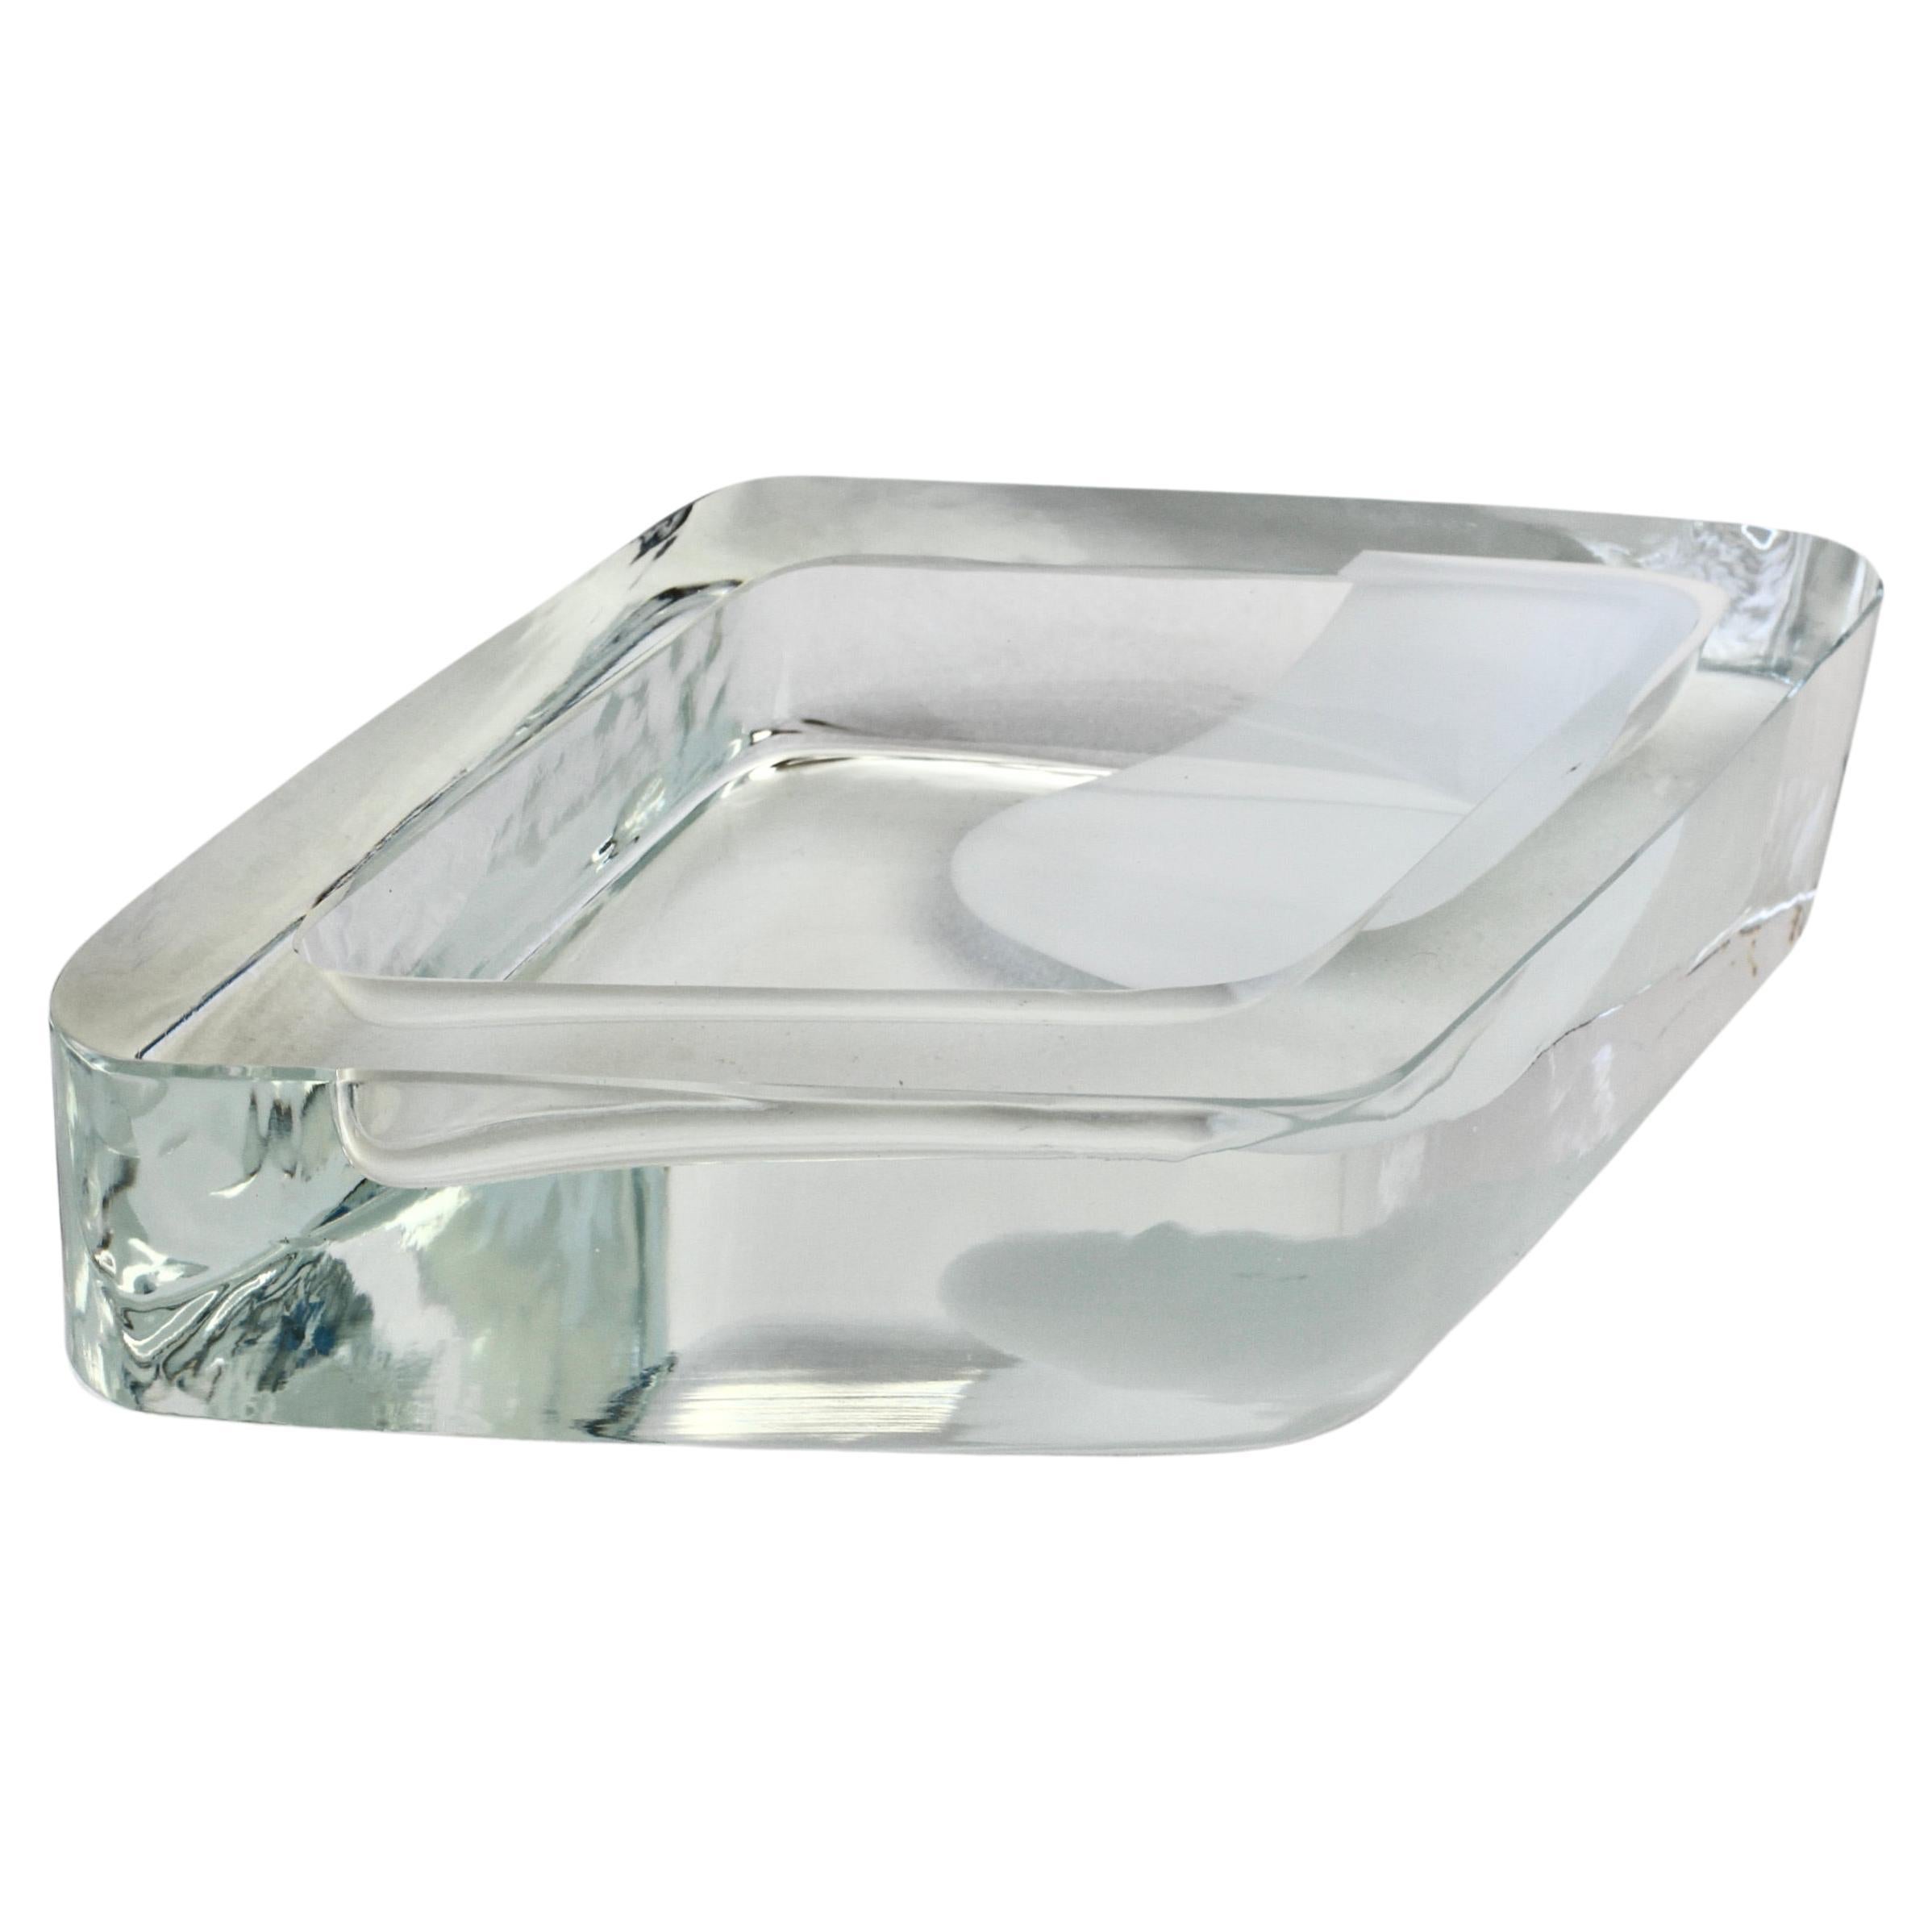 Large Cenedese Italian Rhombus White and Clear Murano Glass Bowl, Dish, Ashtray For Sale